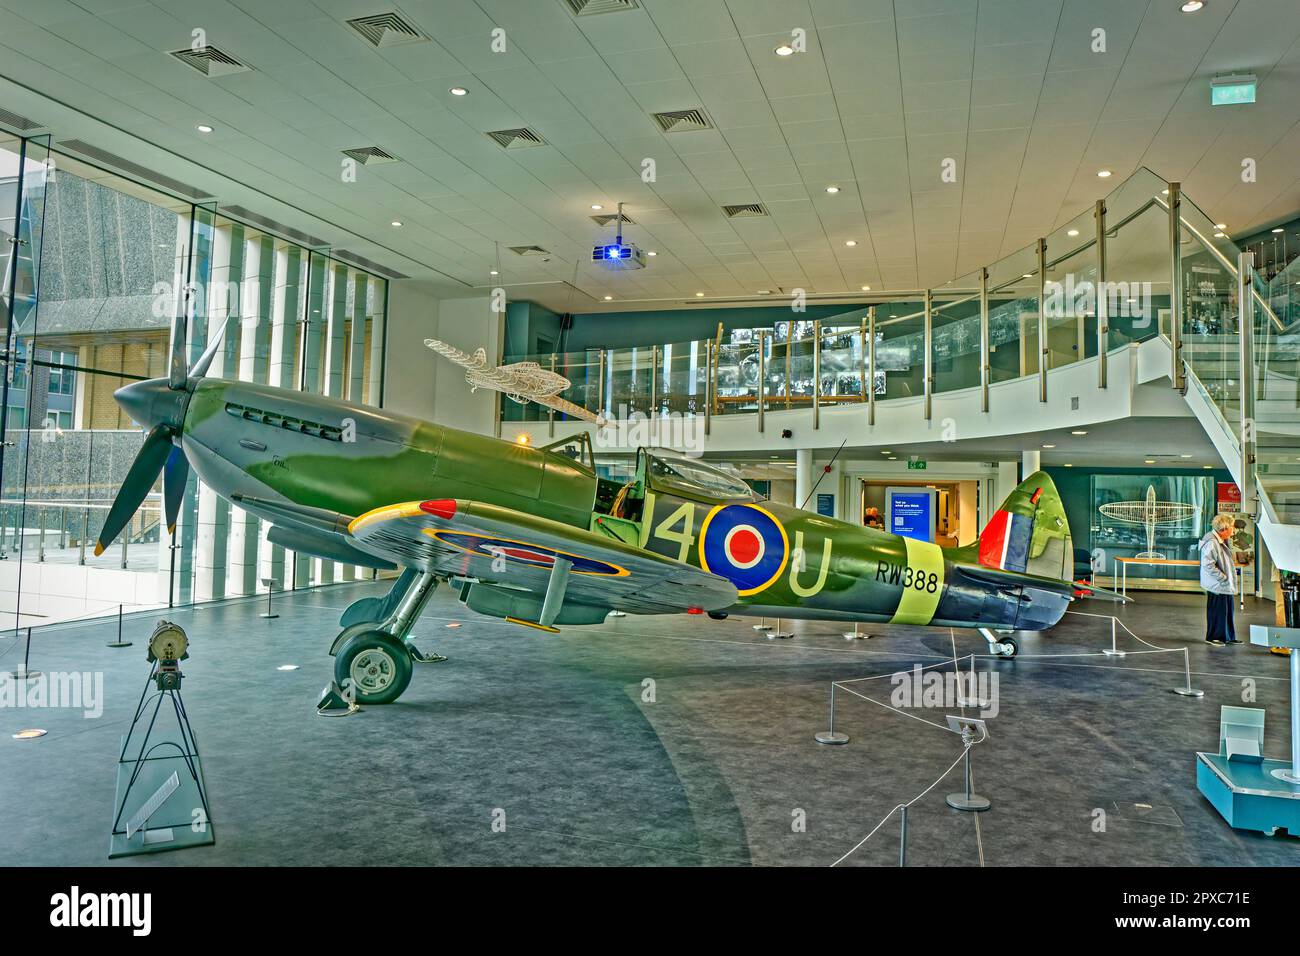 The Potteries Museum Spitfire Hall. RW388 was given to Stoke-on-Trent. It honours Reginald Mitchell, the Staffordshire designer of the Spitfire. Stock Photo